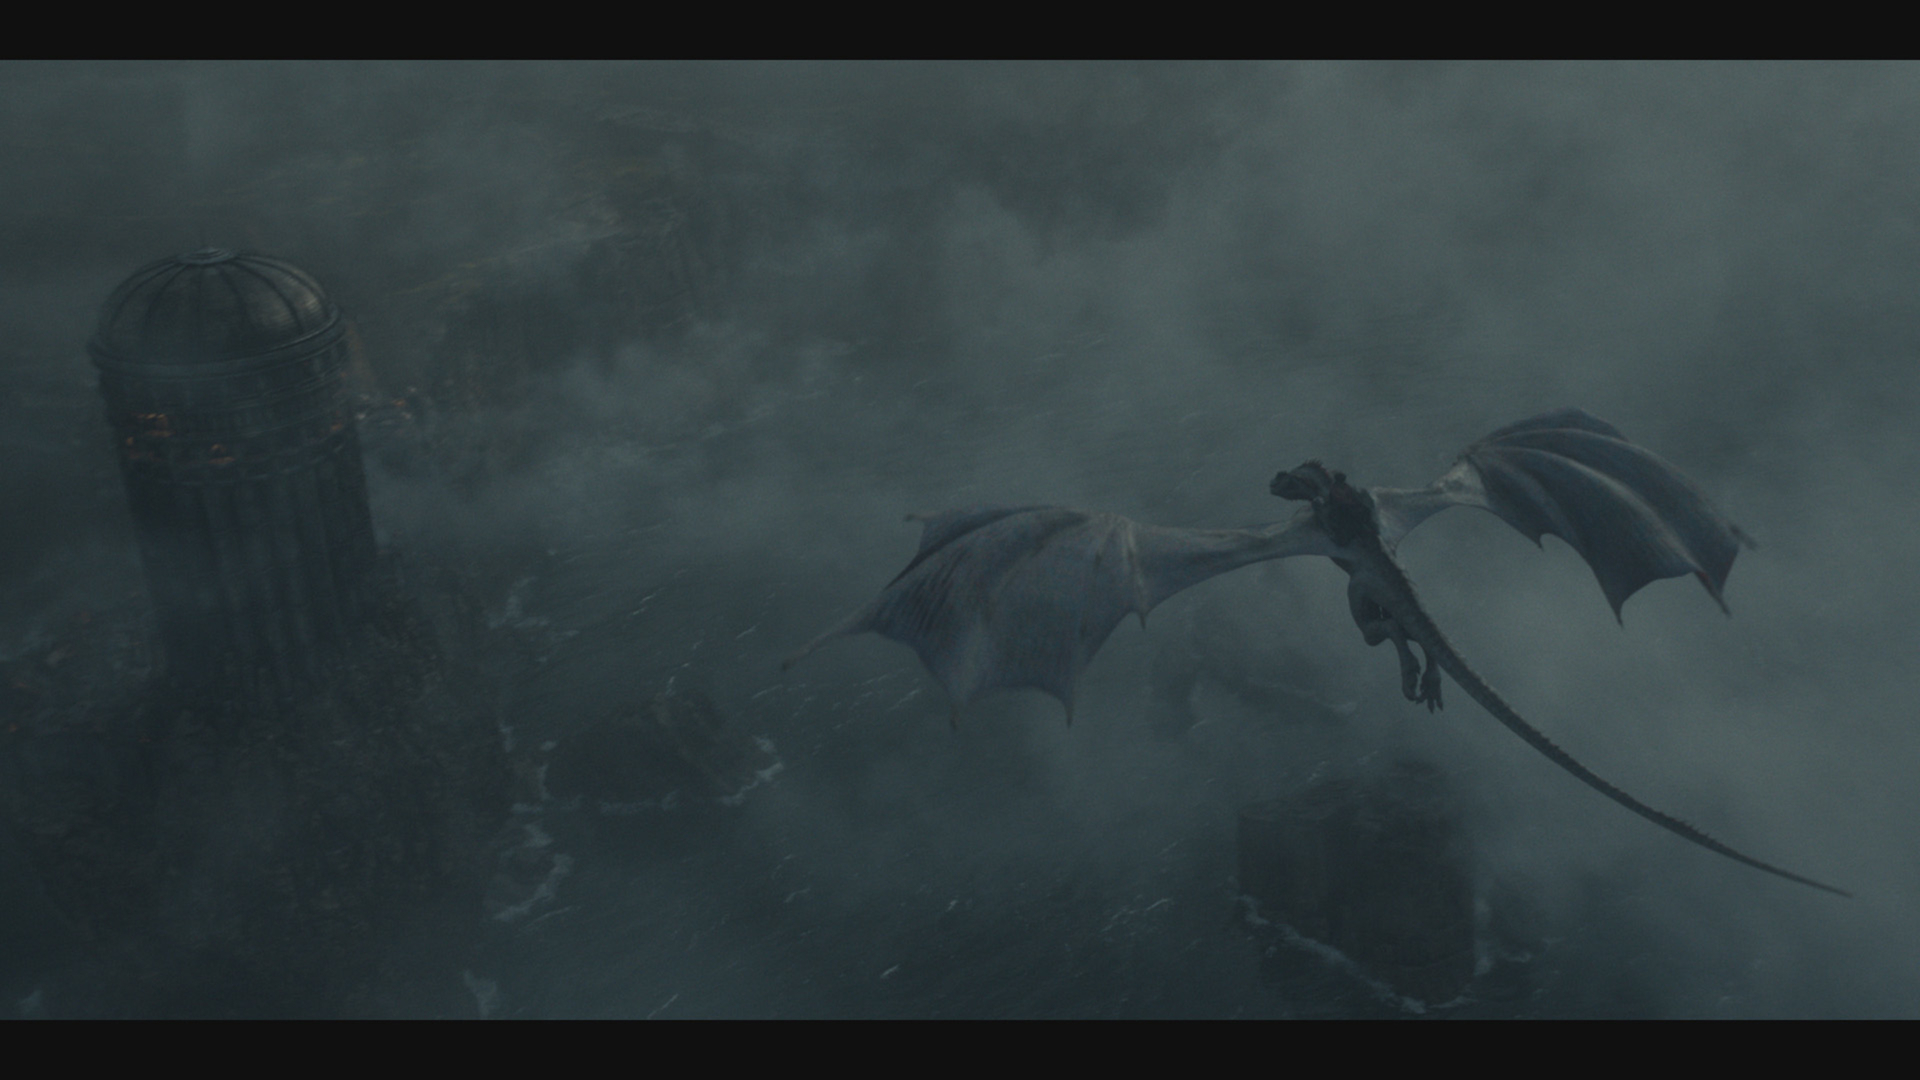 A dragon flies over the clouds setting an ominous tone in house of the dragons episode 10